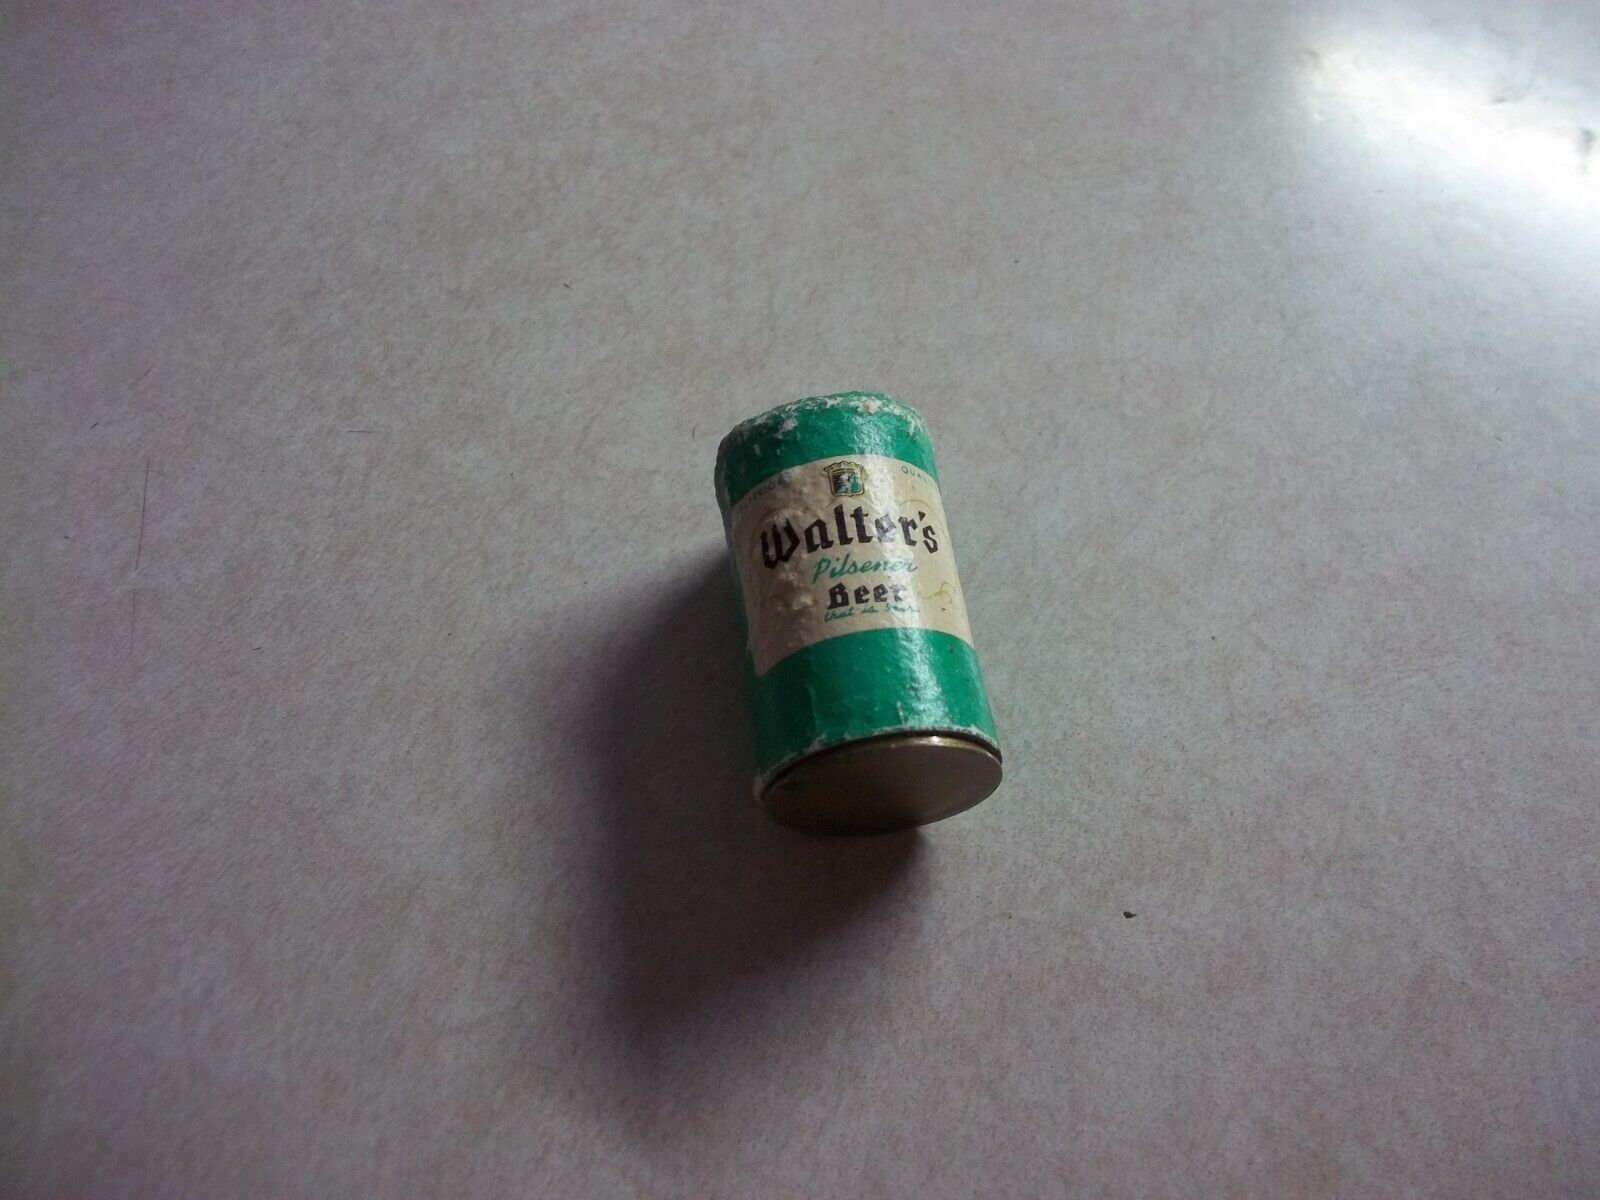 Vintage 1950\'s WALTER\'S BEER CAN SALT SHAKER Eau Claire Wisconsin Wi. Bar Tavern